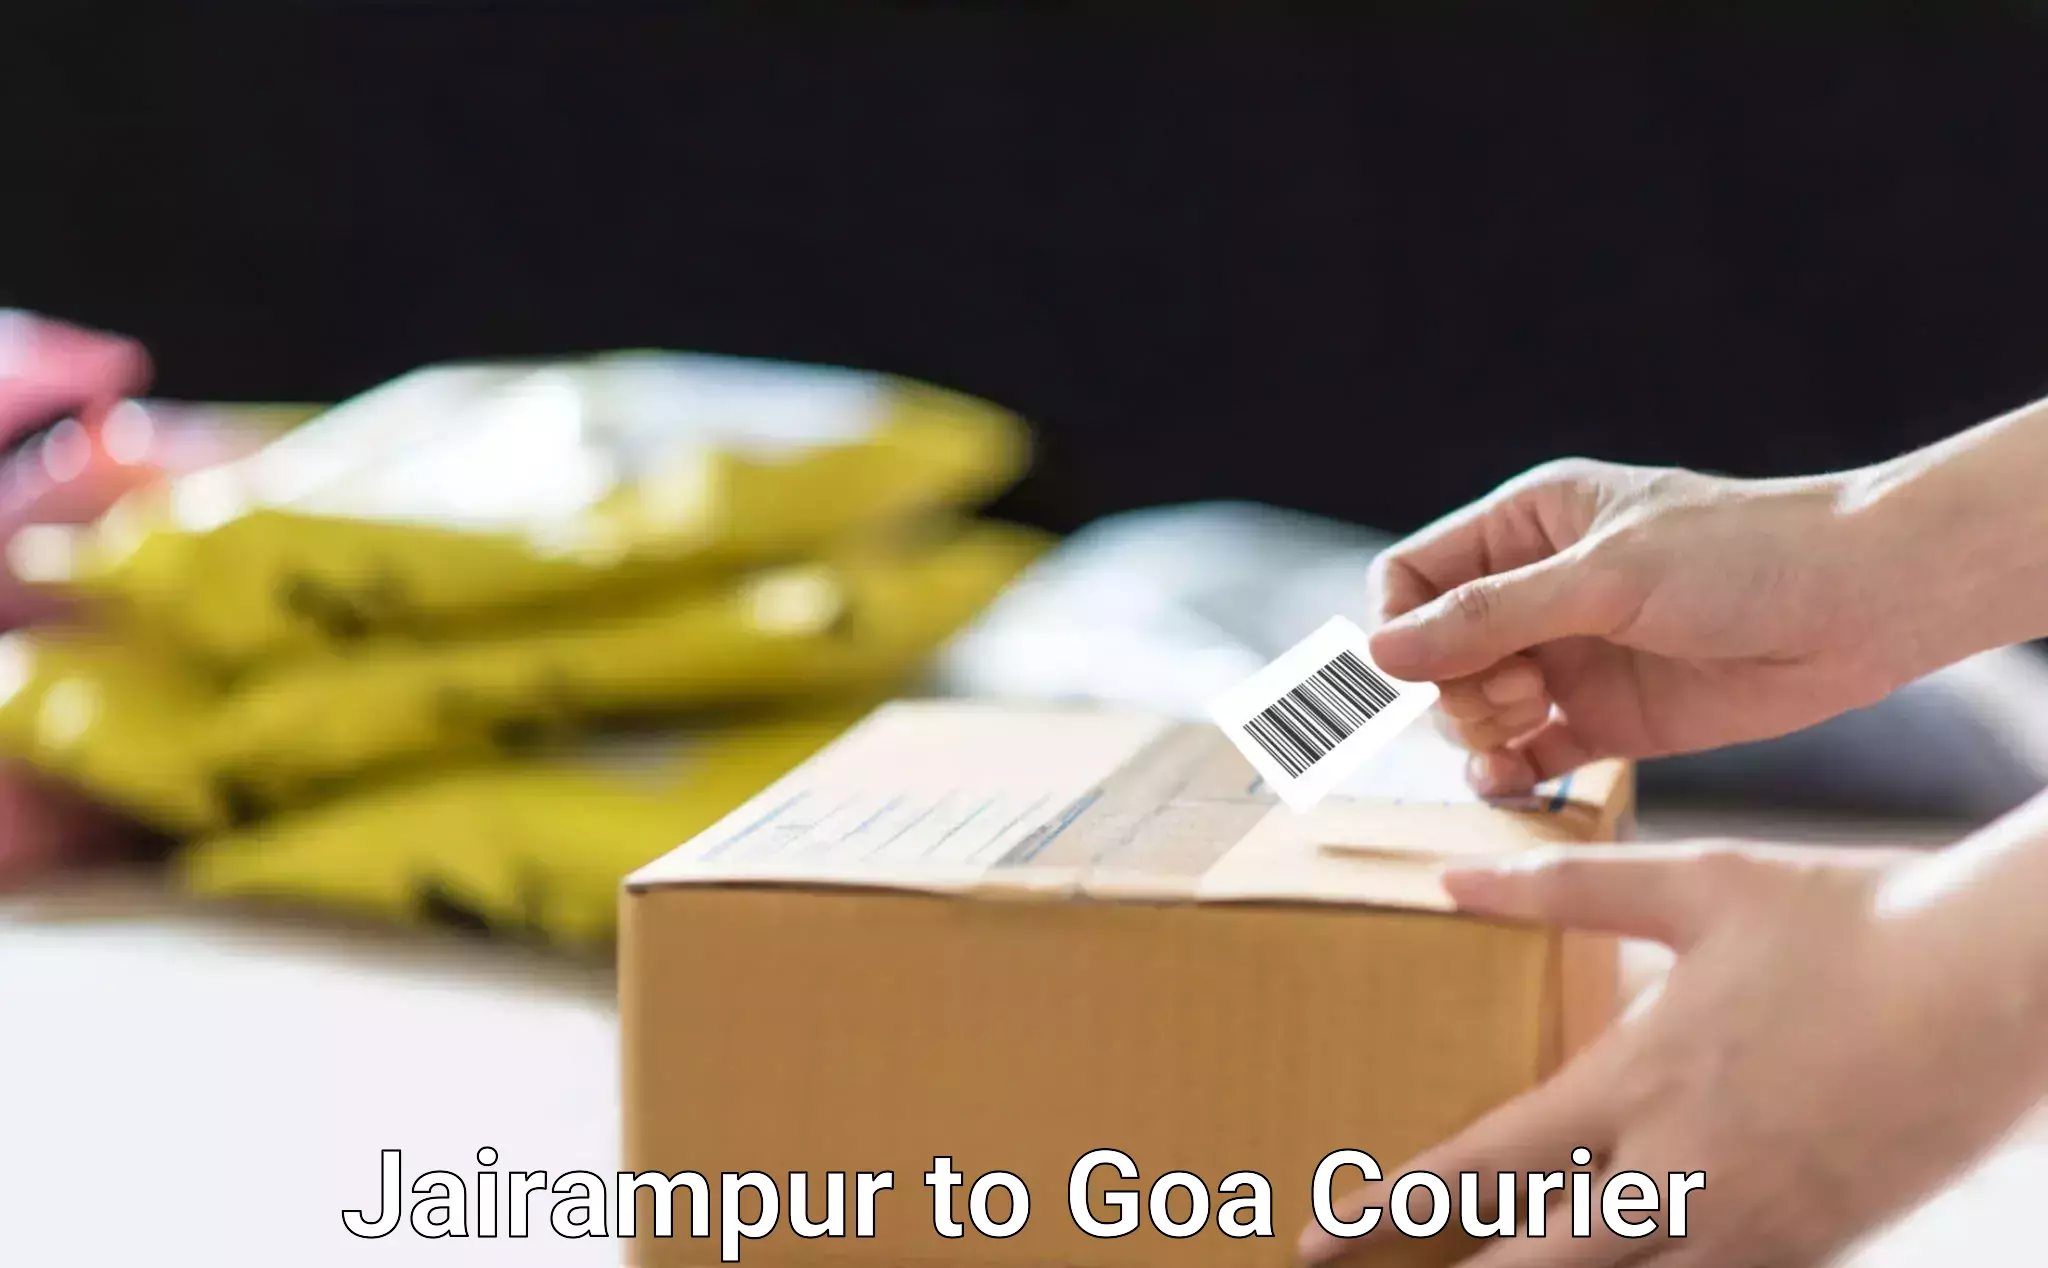 Express delivery capabilities Jairampur to Goa